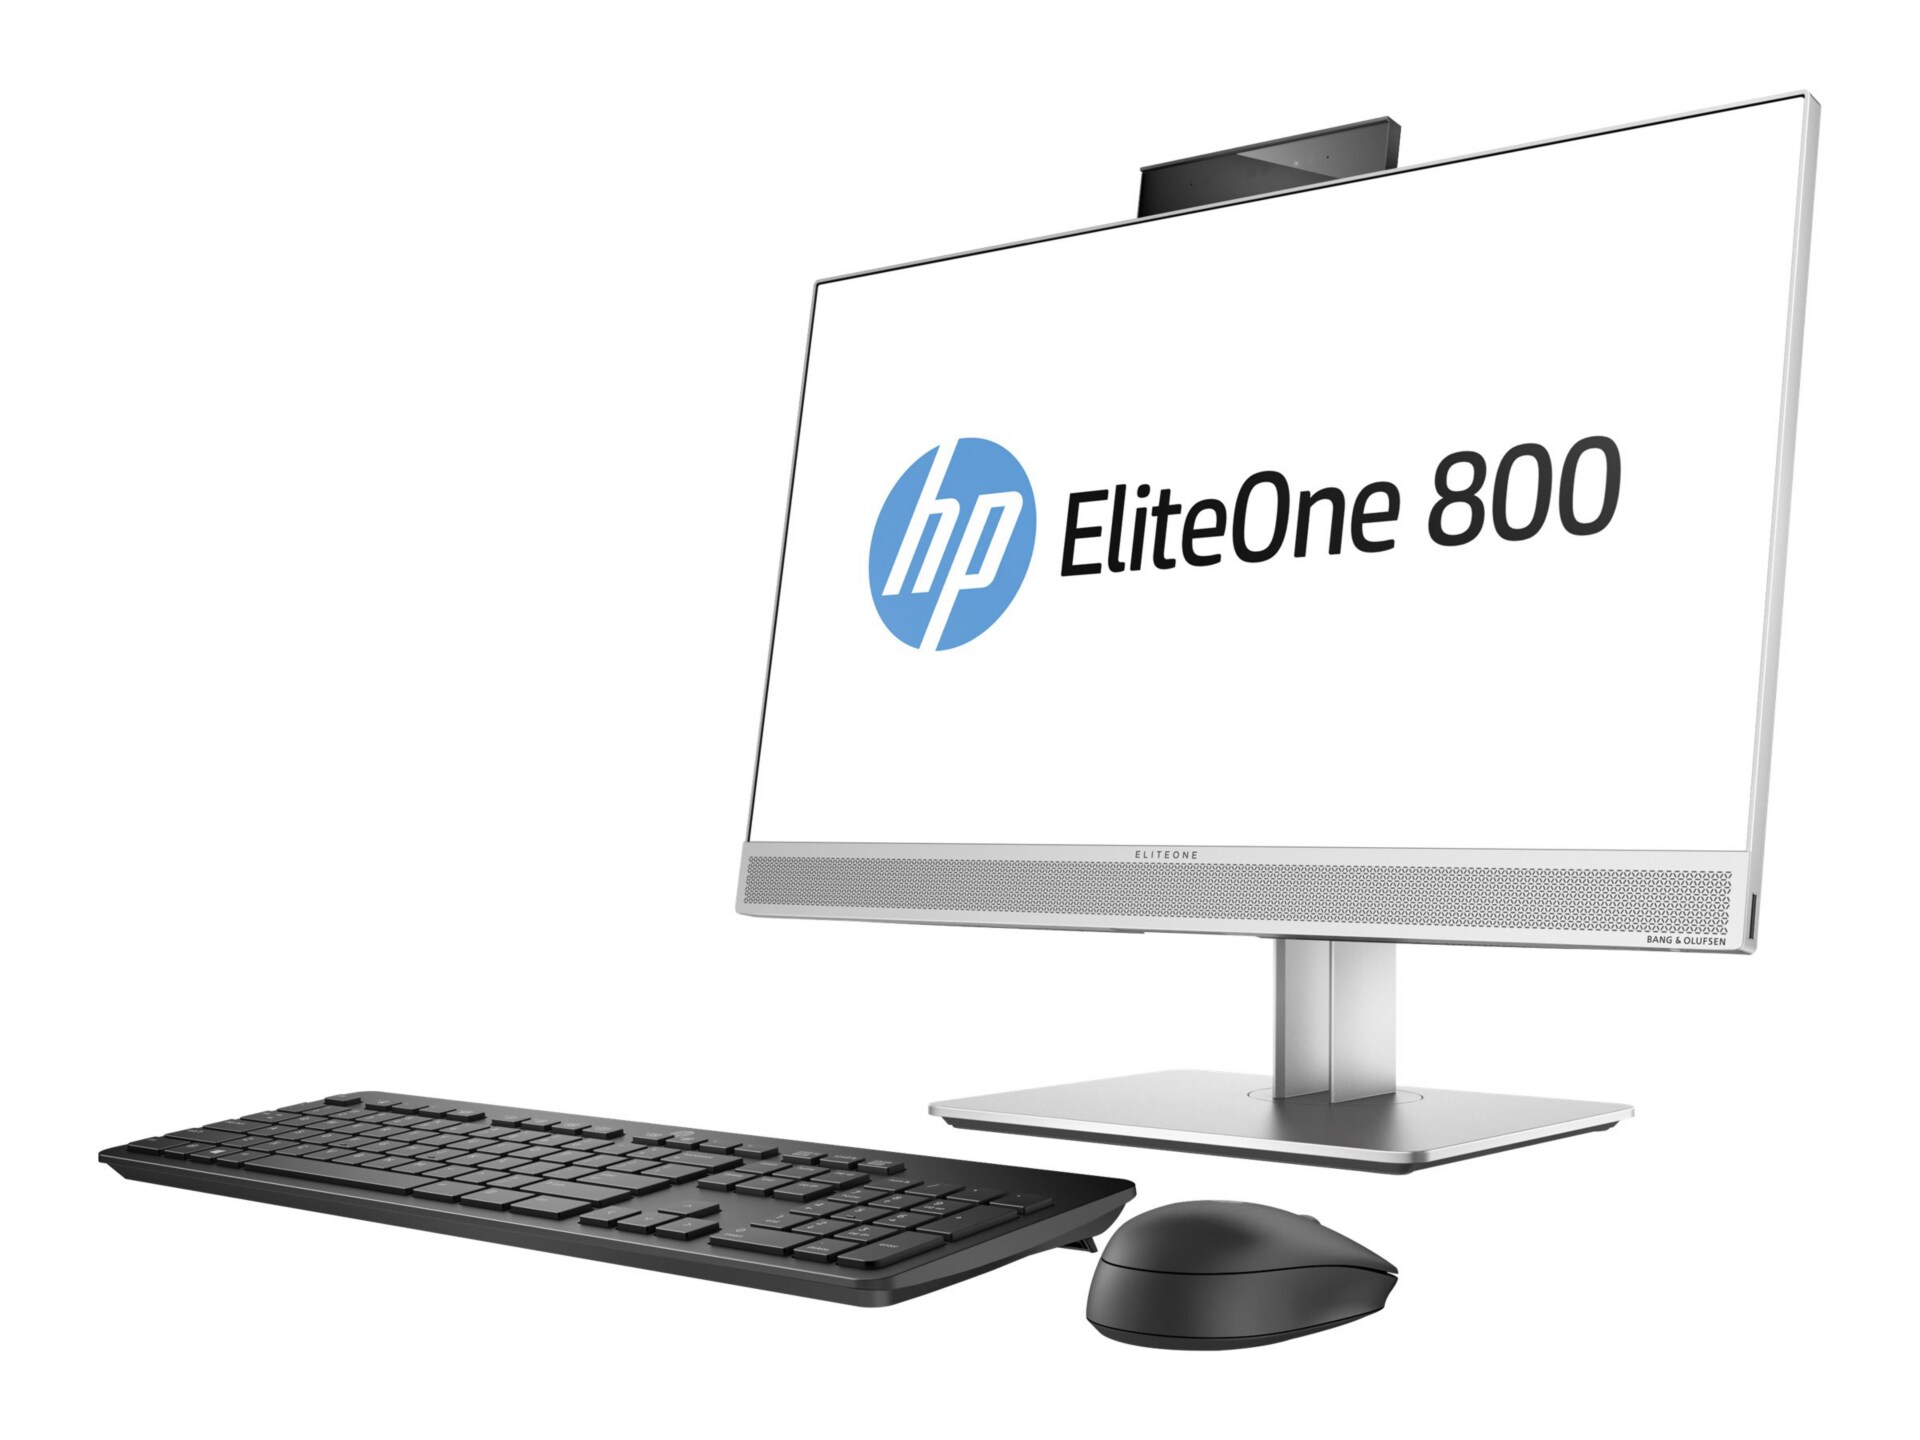 HP EliteOne 800 G3 - all-in-one - Core i7 6700 3.4 GHz - 8 GB - 1 TB - LED 23.8"